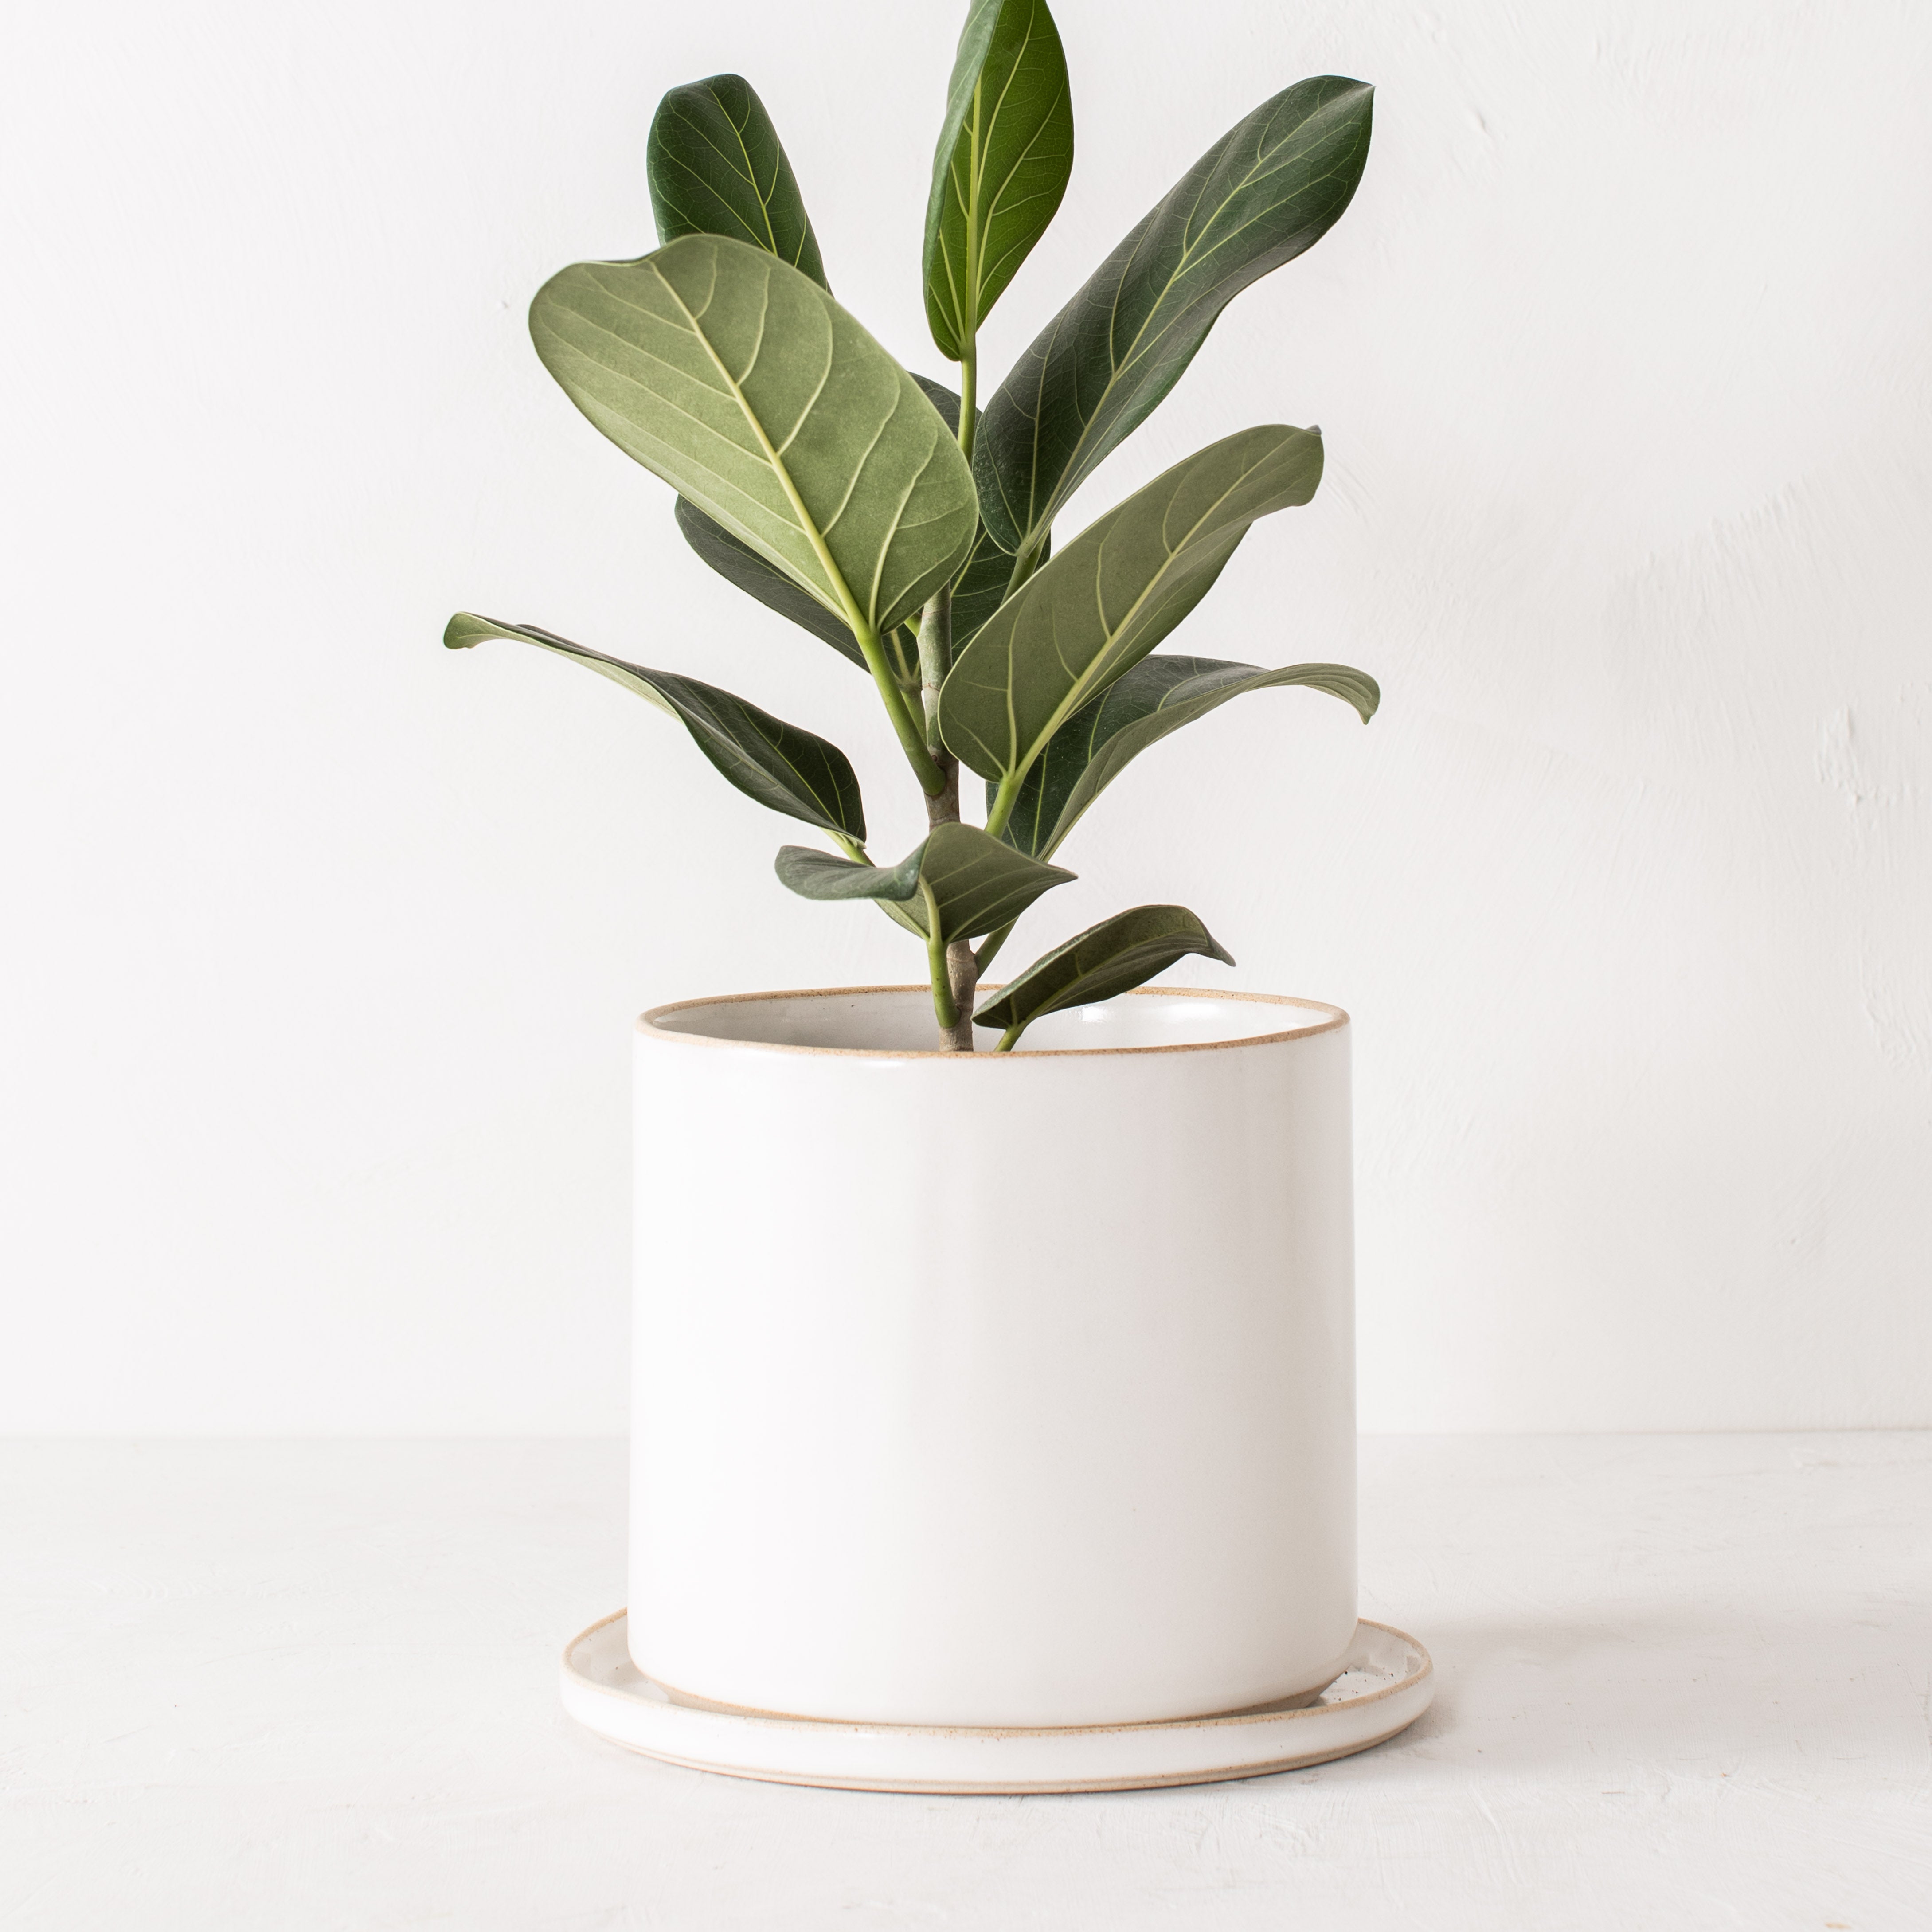 8 inch white ceramic planter with a bottom drainage dish. Staged on a white plaster textured tabletop against a plaster textured white wall. Audrey Ficus plant inside. Designed and sold by Convivial Production, Kansas City Ceramics.